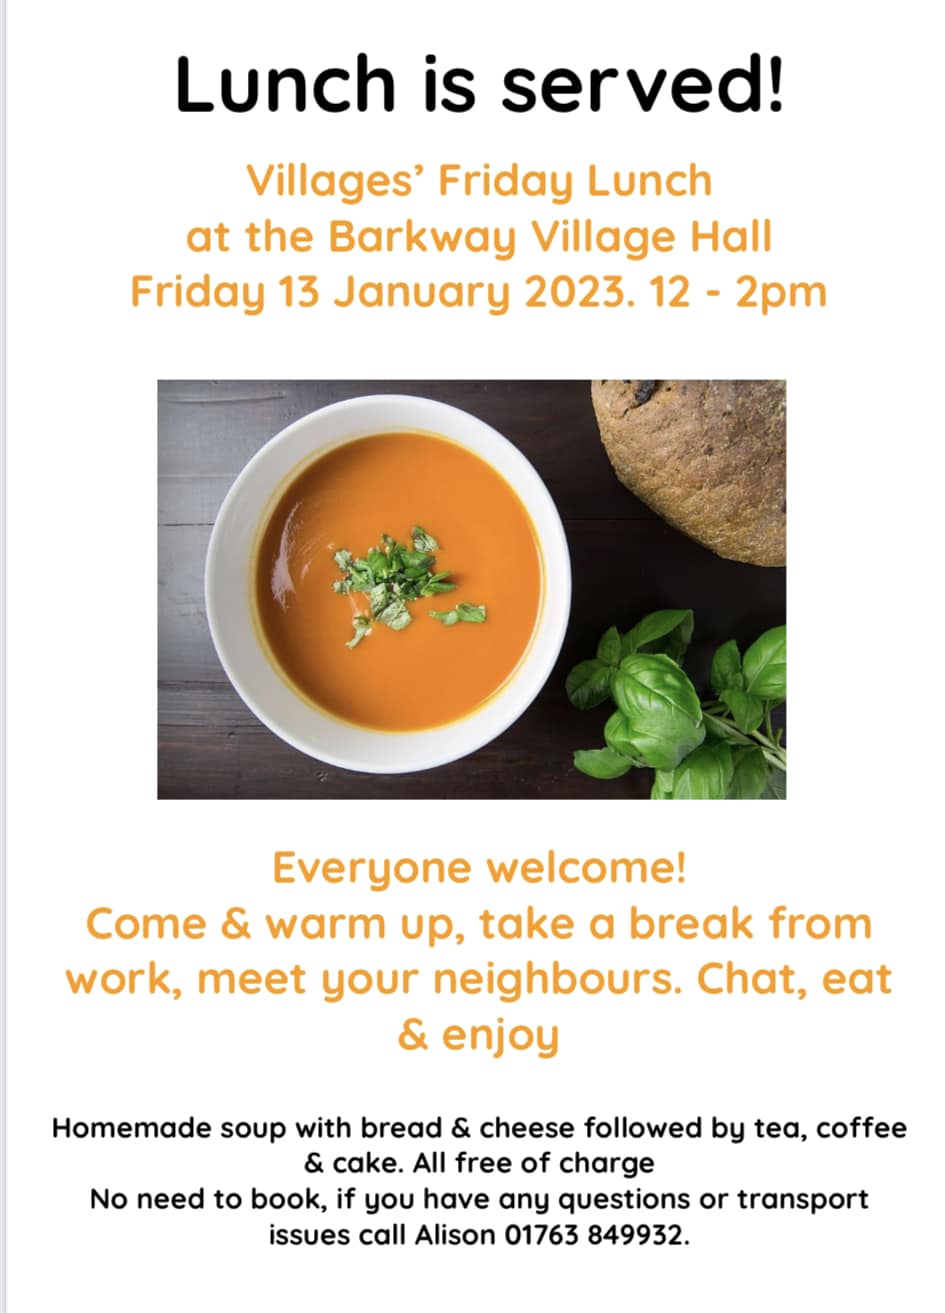 Barkway Village Hall offers a great space for a catered event. The kitchen facilities are spacious, ...